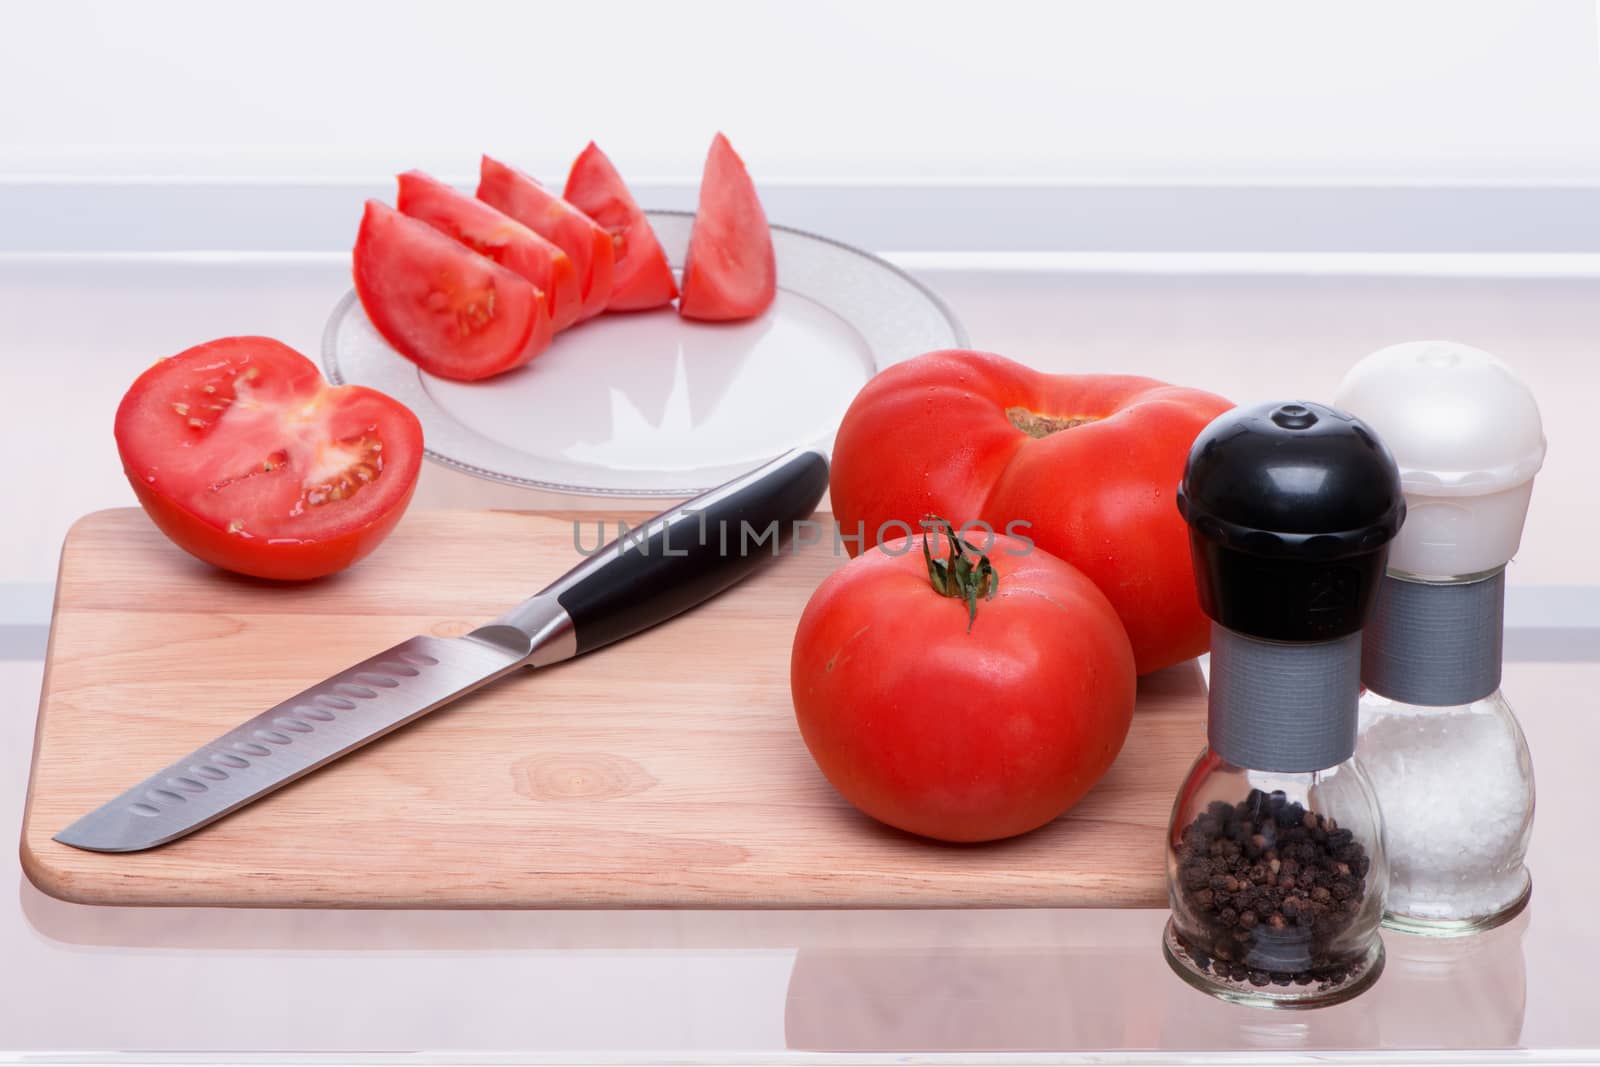 Tomatoes are sliced and salted also by pepper